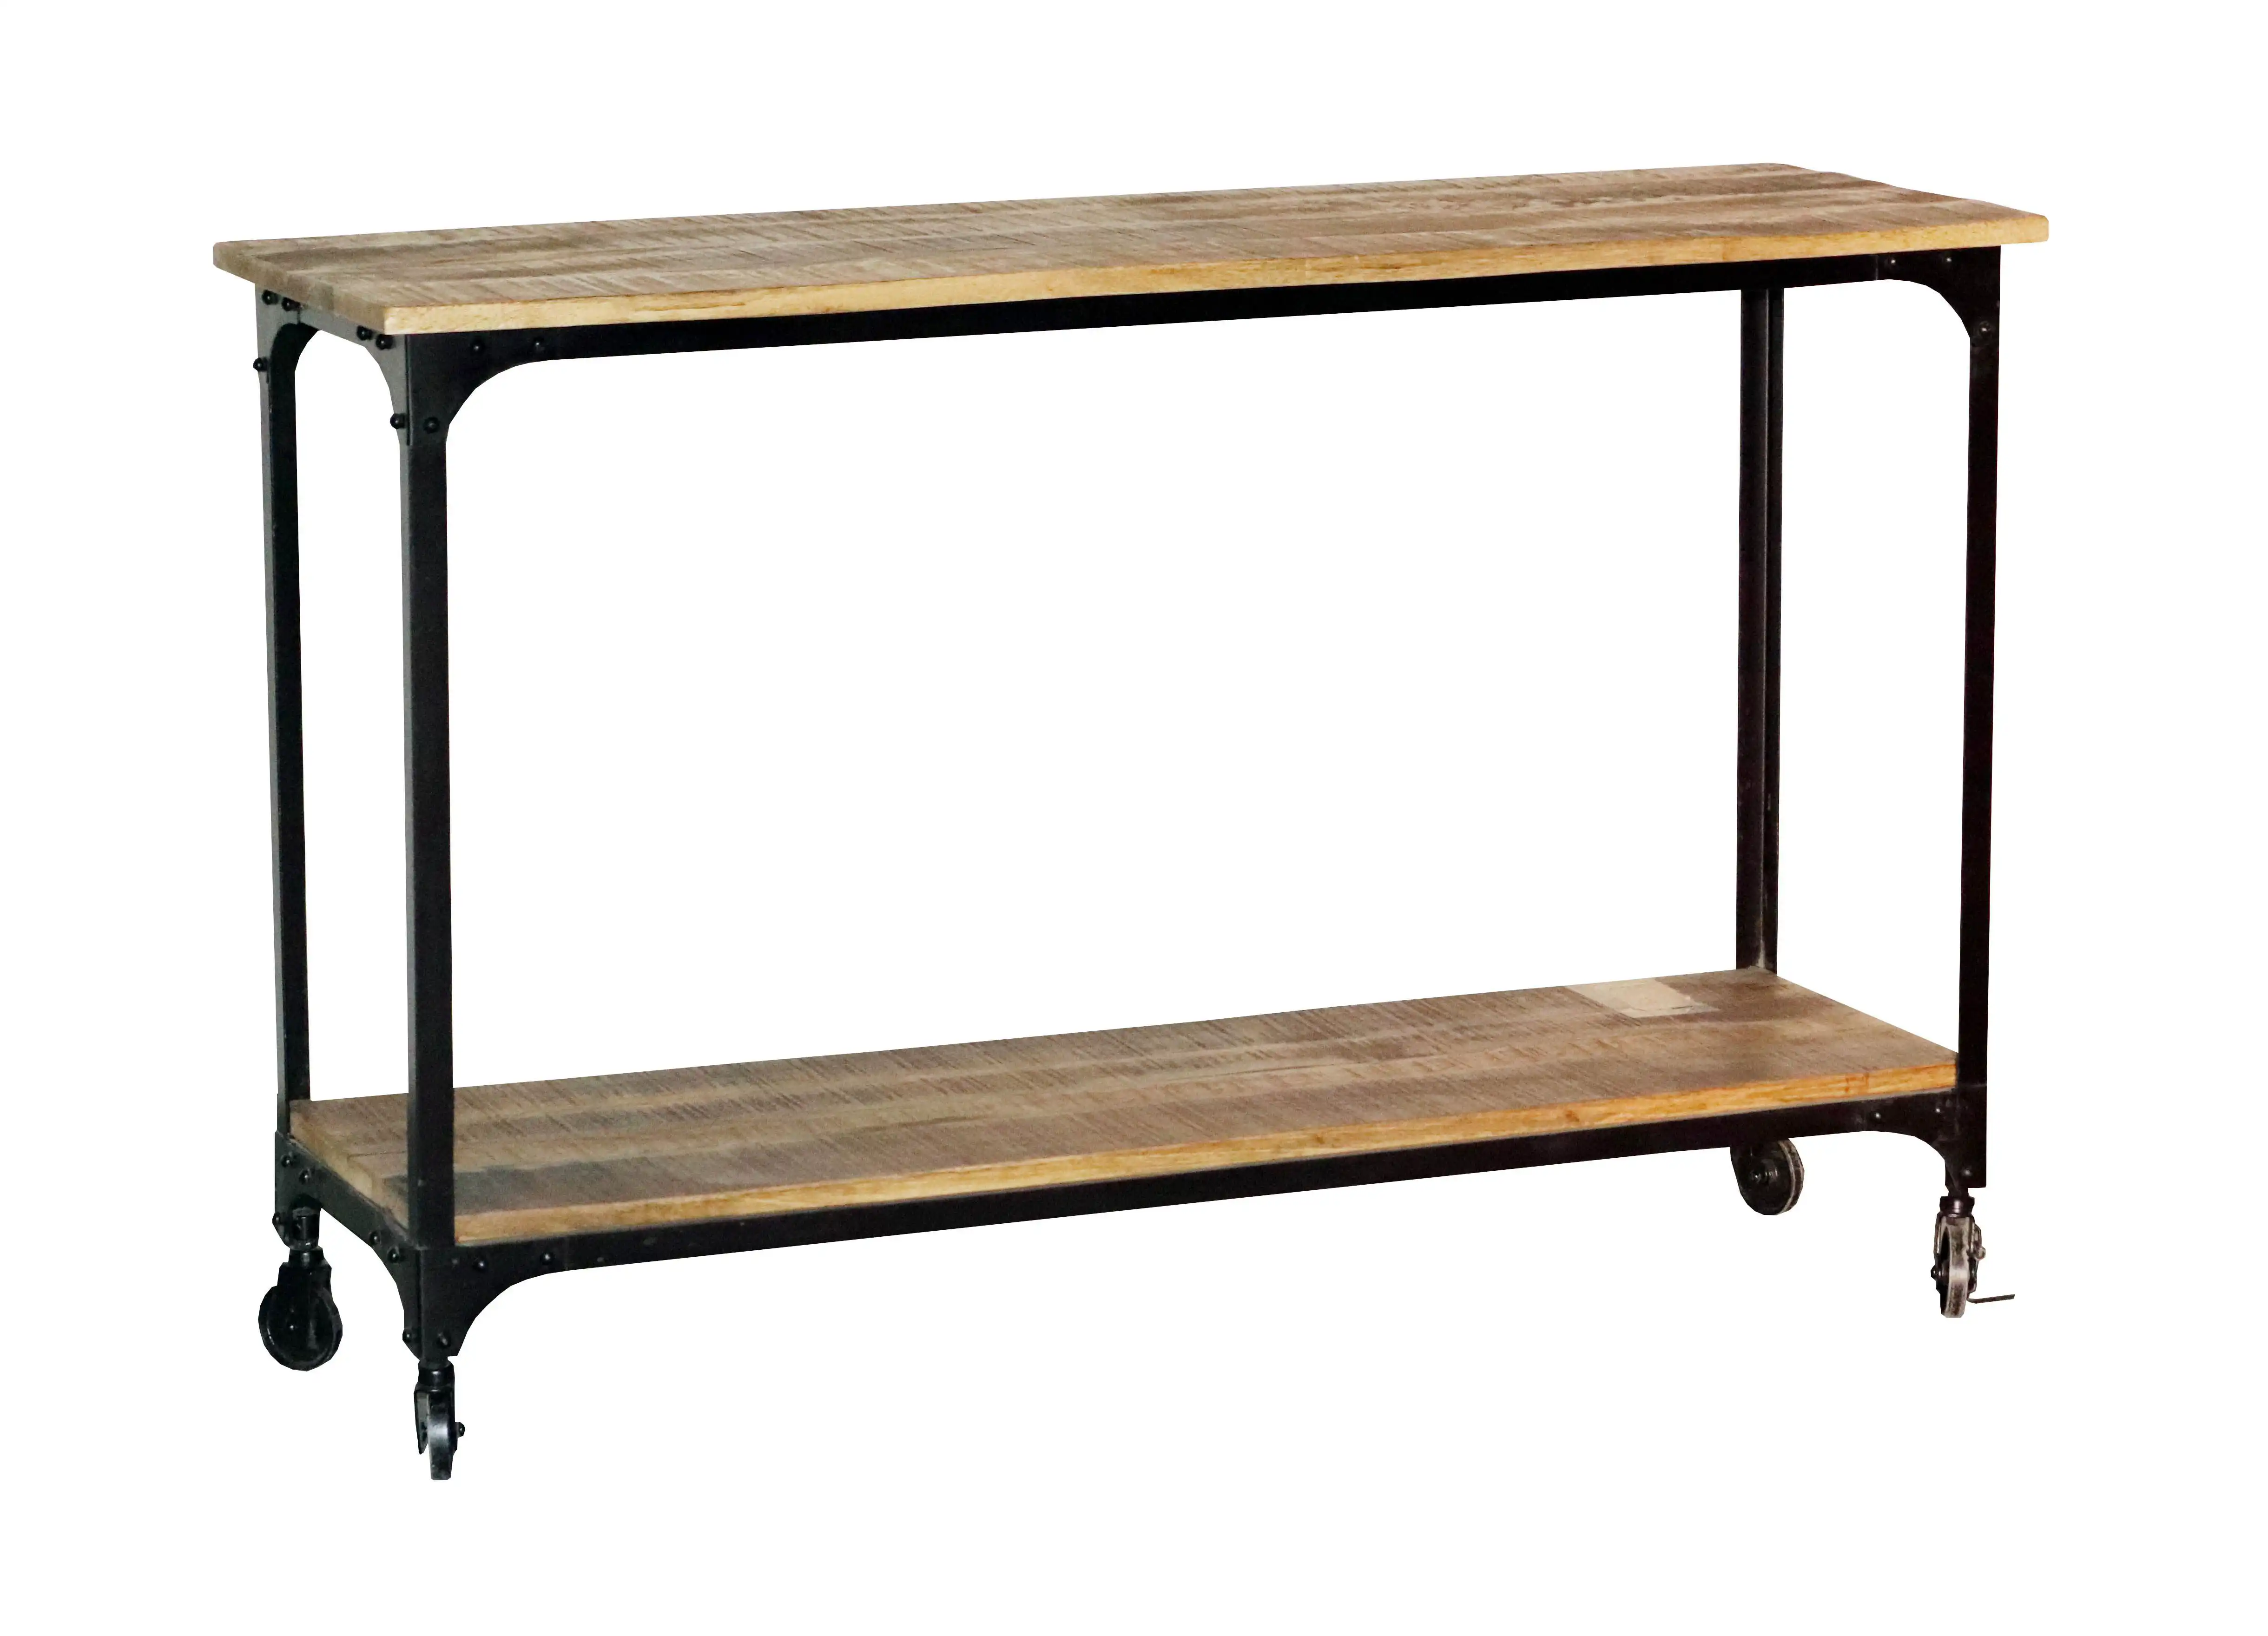 2 Tier Industrial Wooden & Iron Console Table with Wheels - popular handicrafts